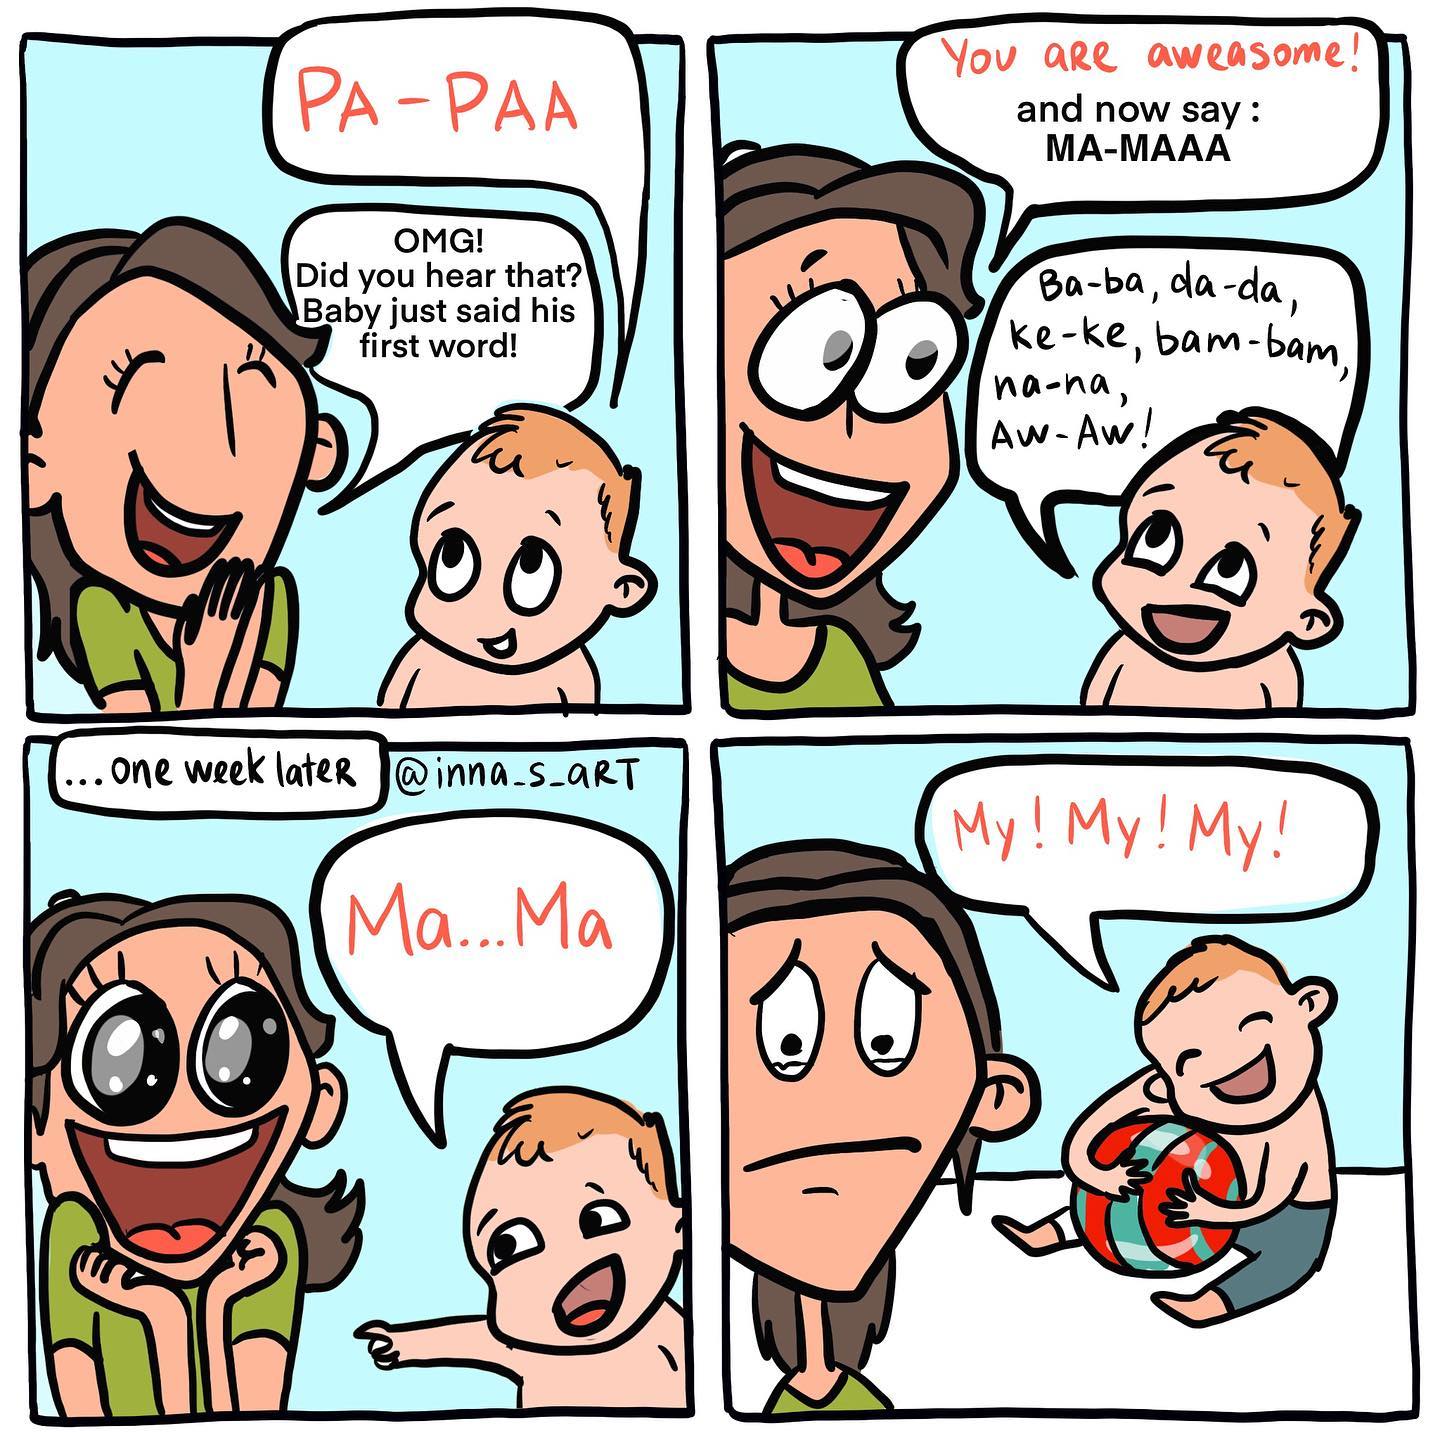 comics of a happy woman because her child said mama